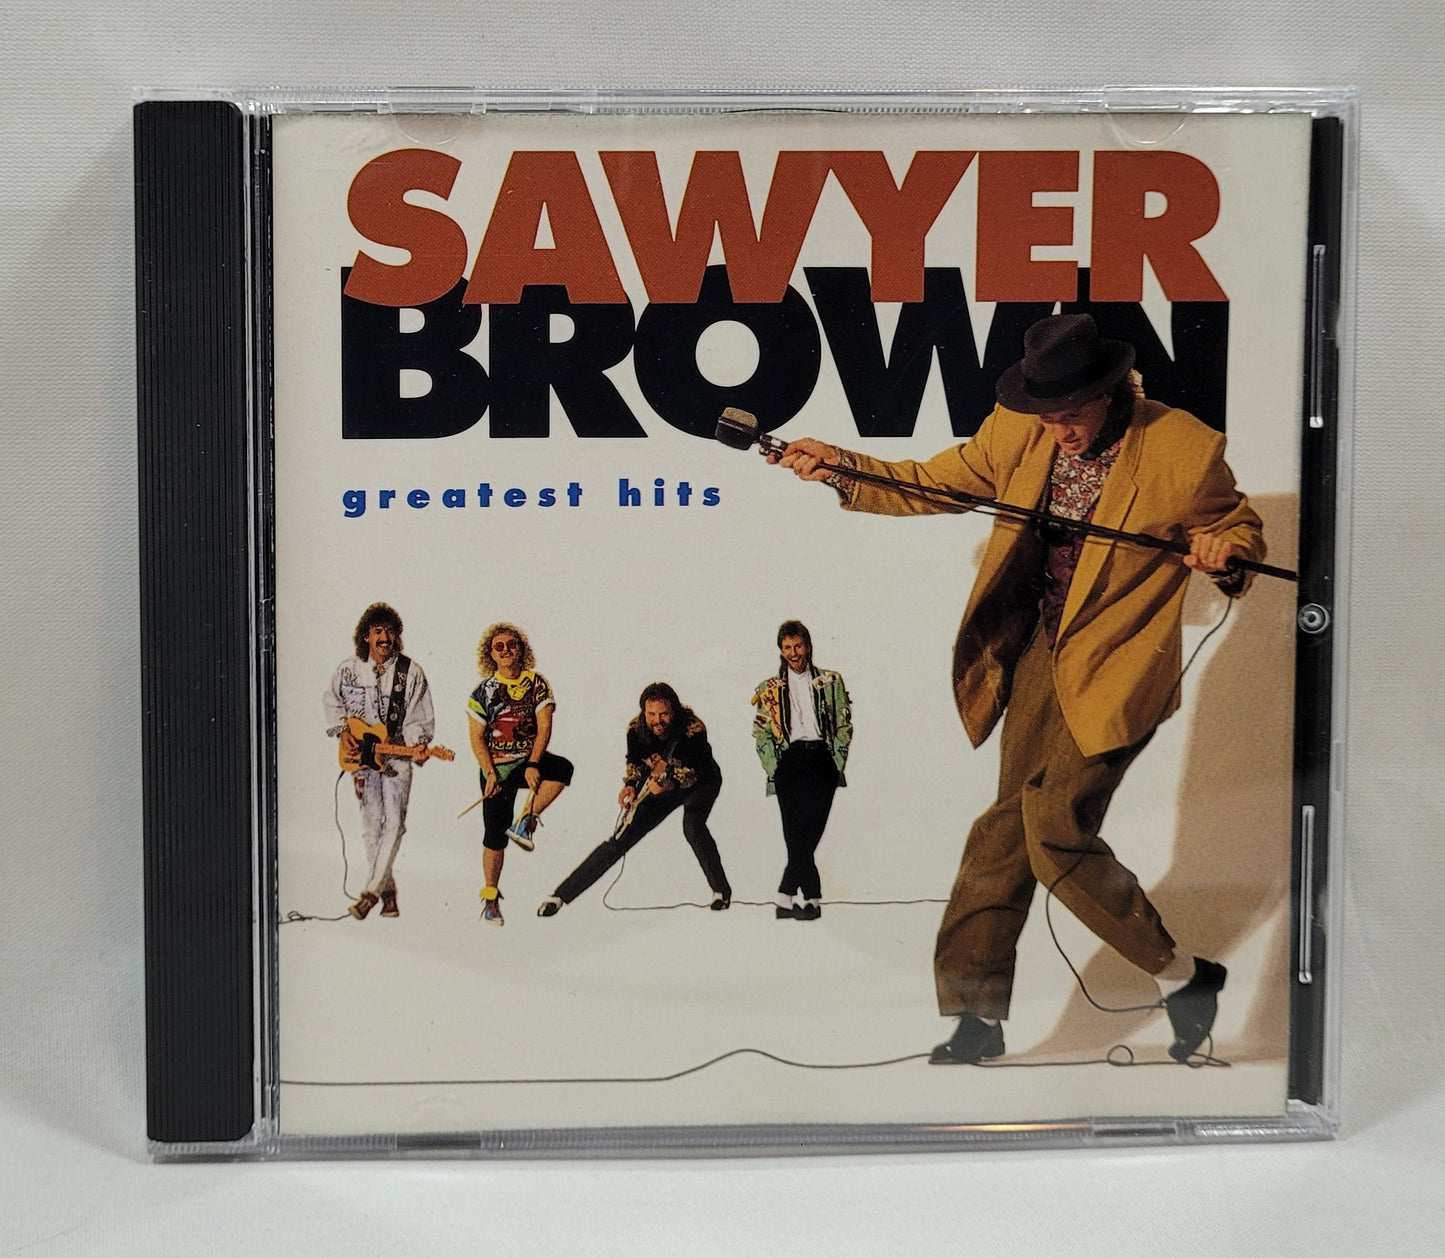 Sawyer Brown - Greatest Hits [1990 Compilation] [Used CD]